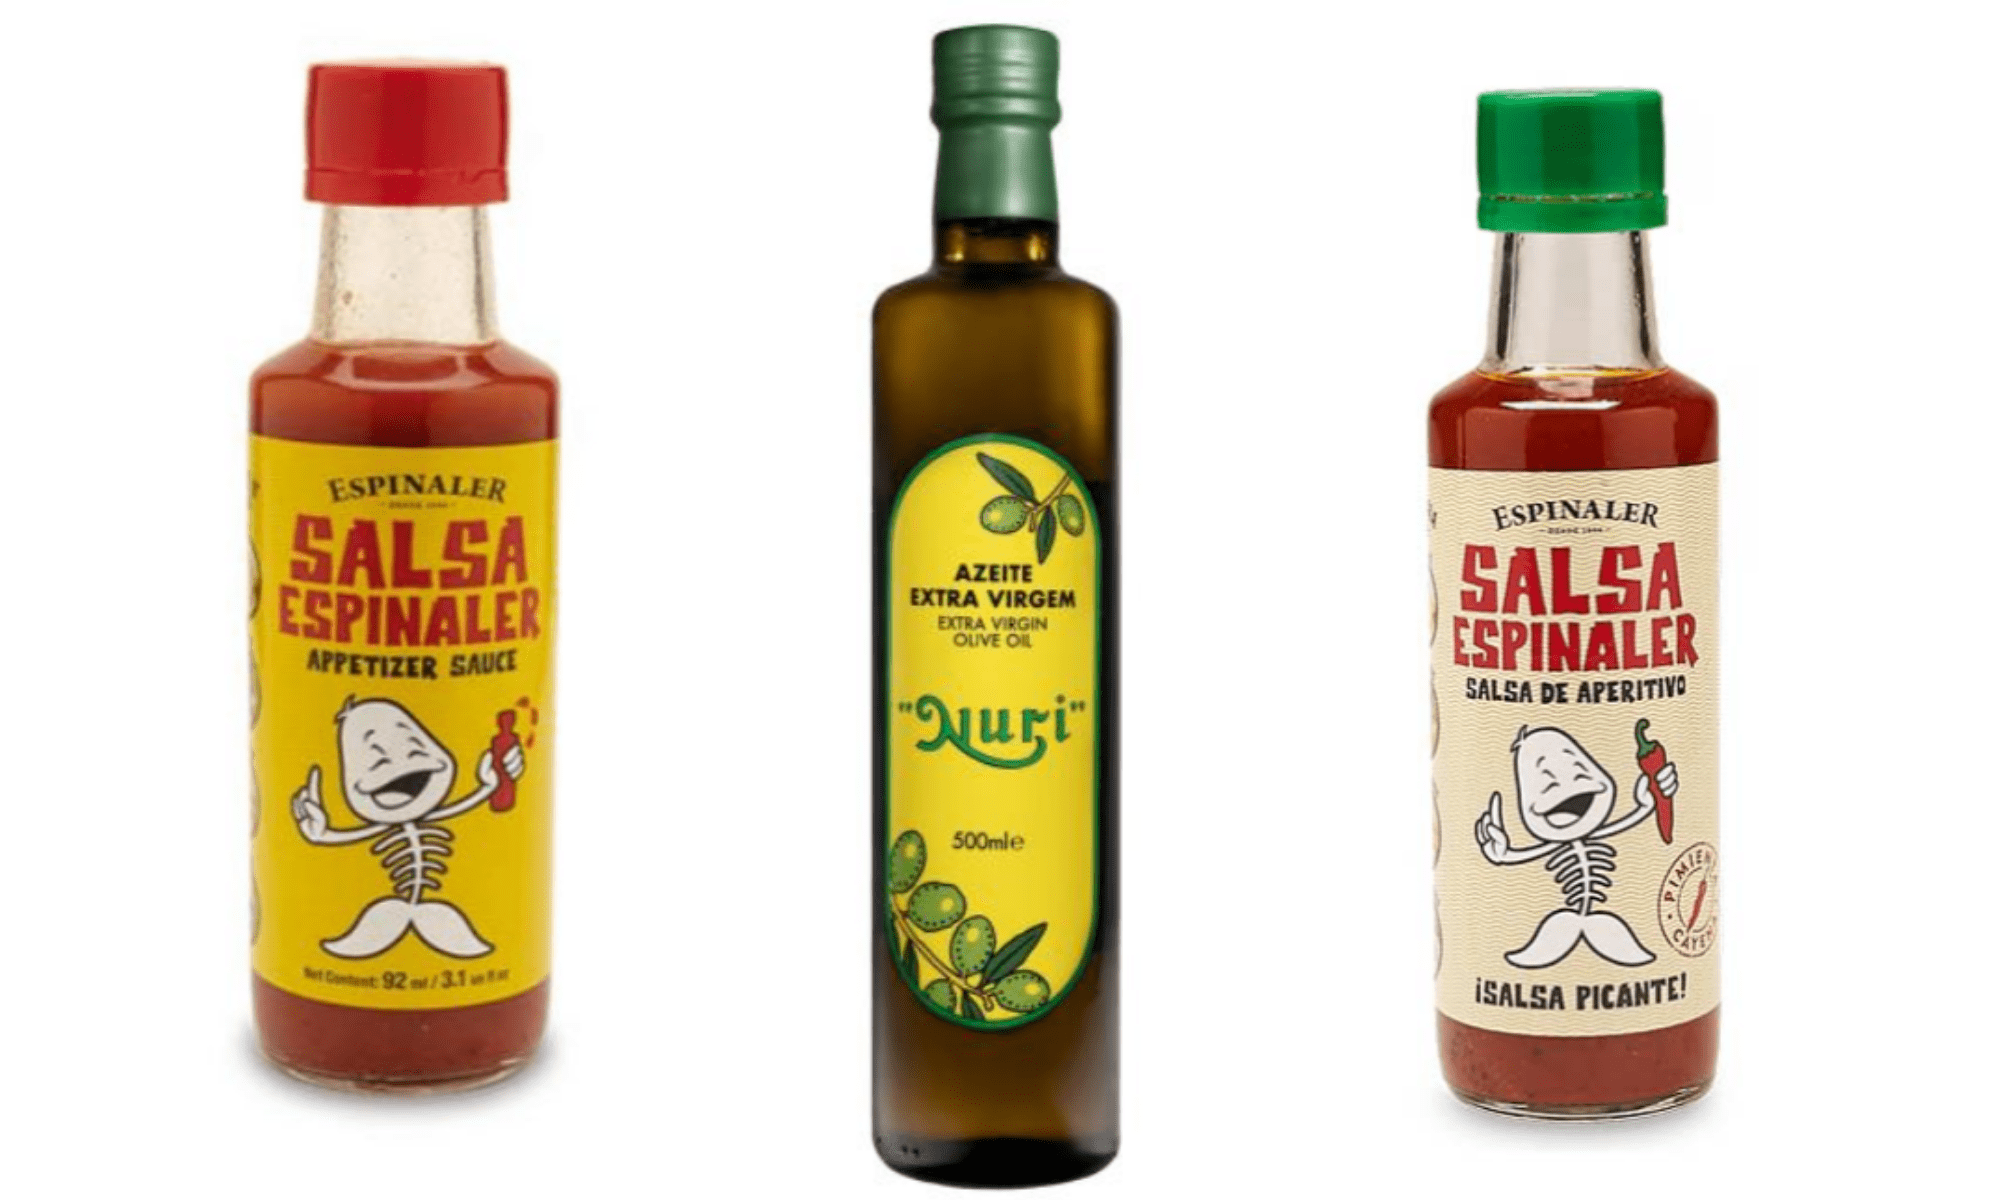 Header image of espinaler sauce and nuri olive oil